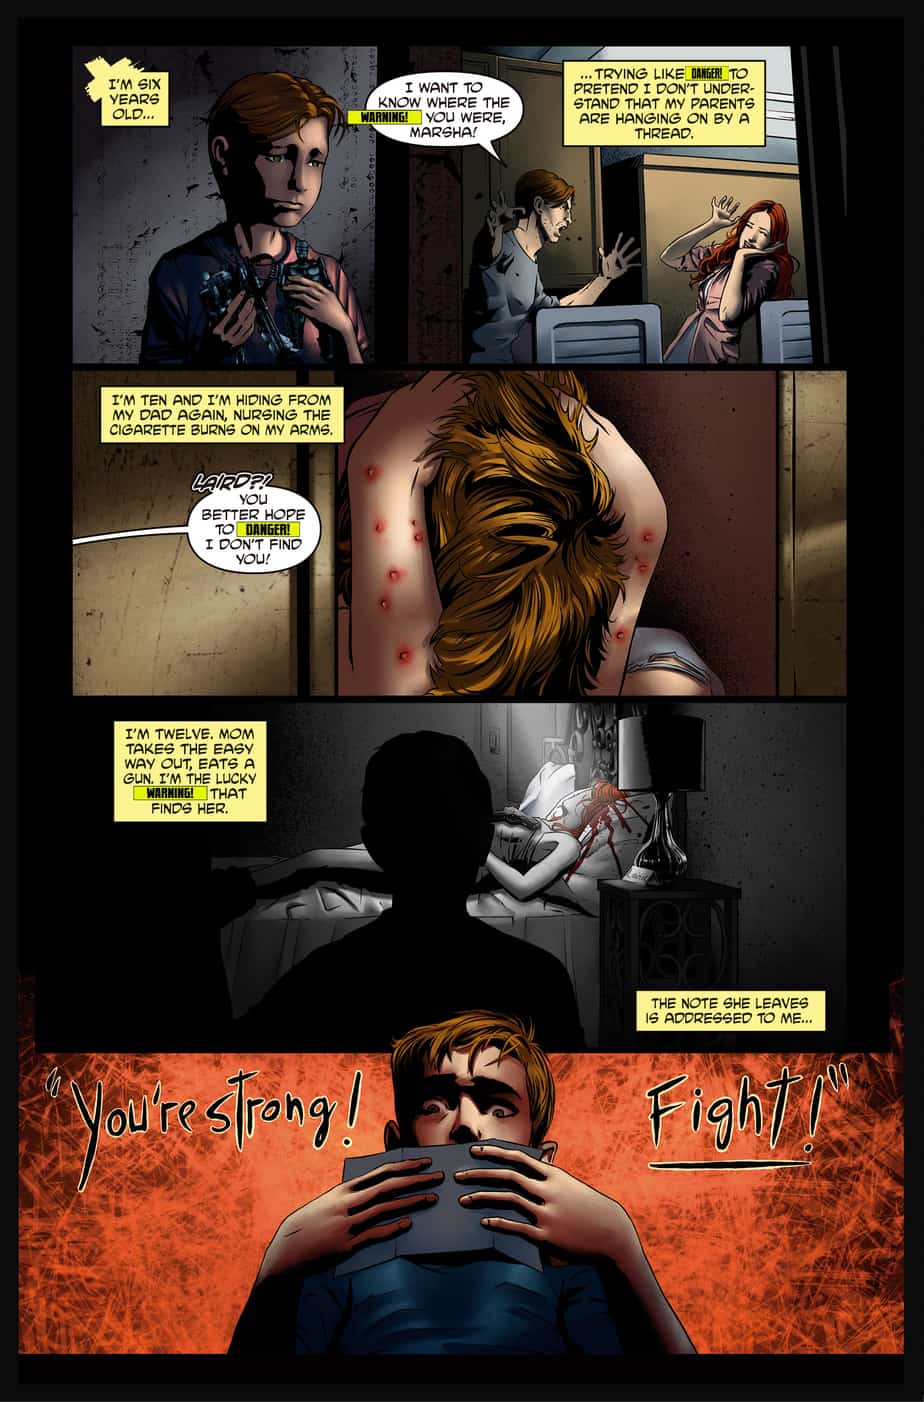 Banjax #1 - preview page 6